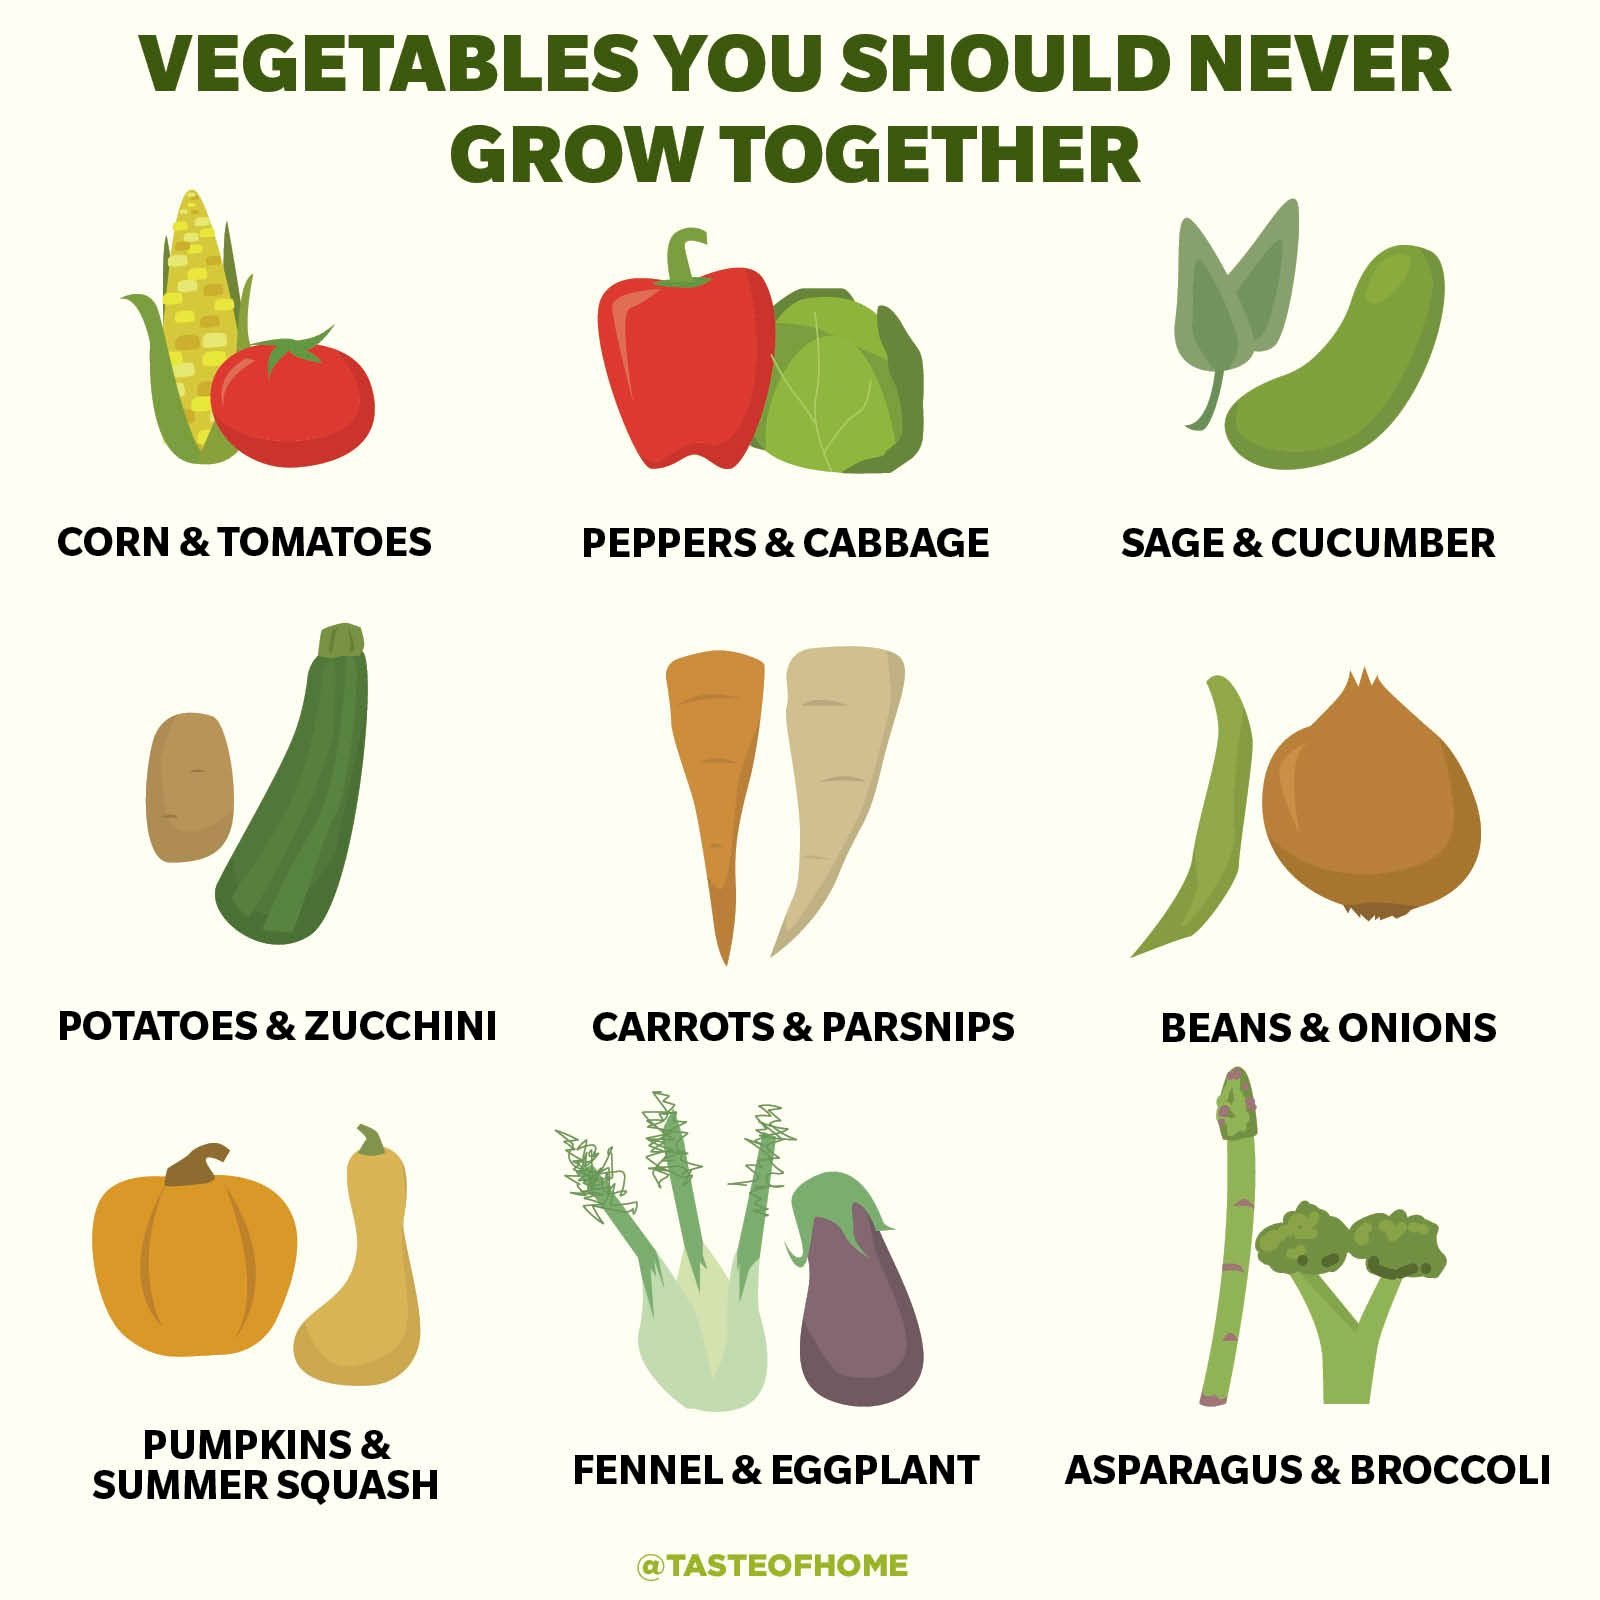 Image of Vegetables that should not be planted together because they compete for nutrients or space